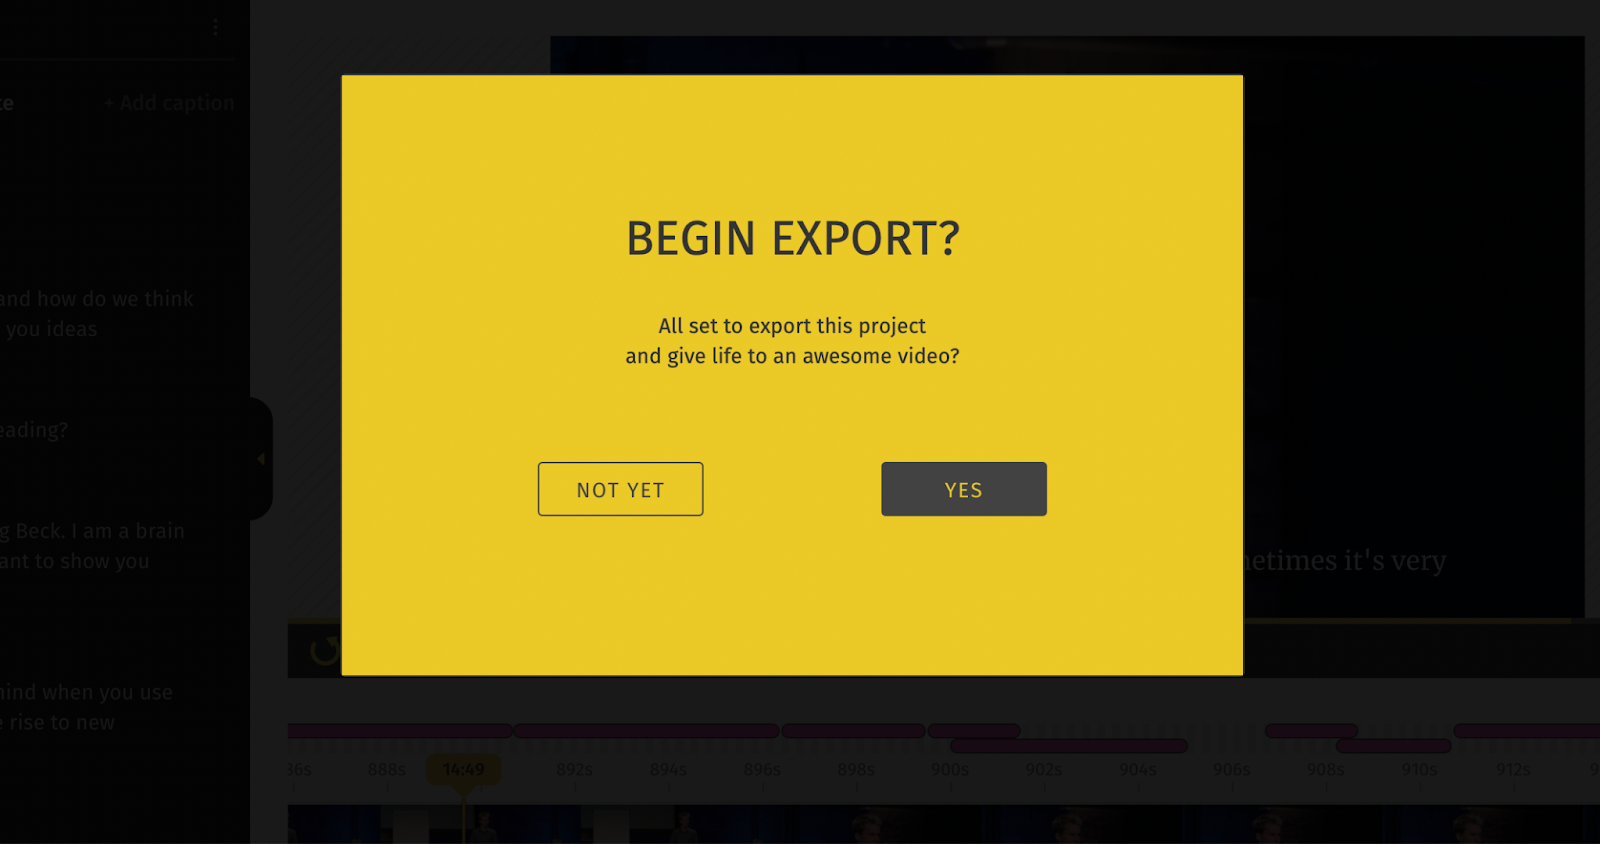 Click Yes to begin the export process.